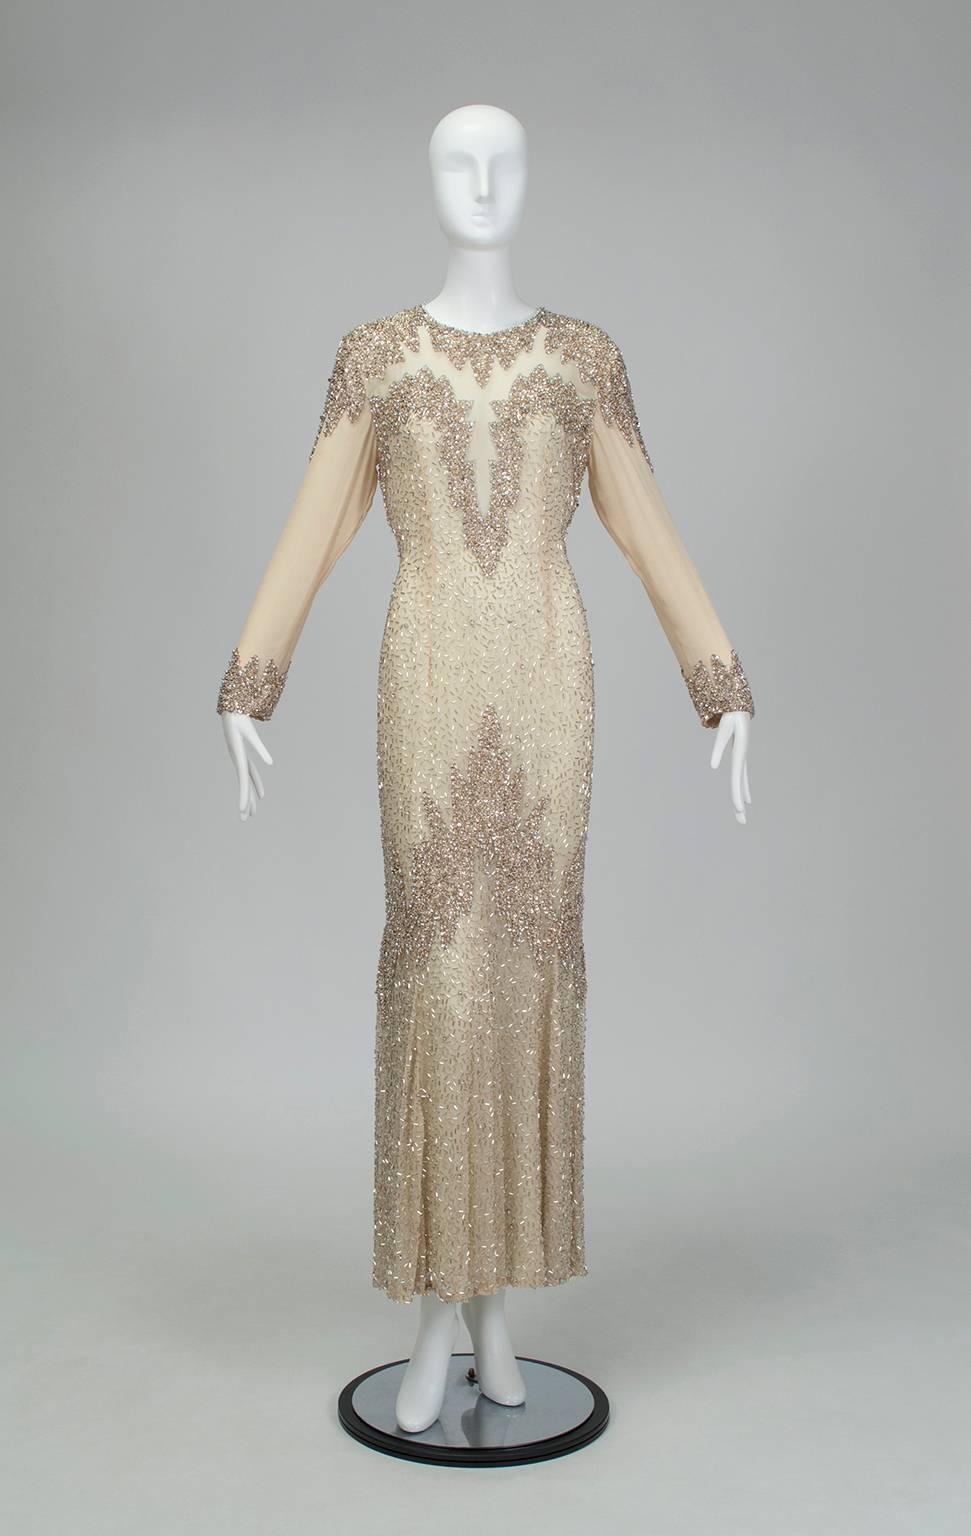 Achingly similar to Sharon Stone’s nude Bob Mackie gown in “Casino,” this illusion gown covers all the naughty bits with a solid crust of rose gold sequins, silver beads and rhinestone nuggets but leaves the rest exposed by a thin layer of flesh